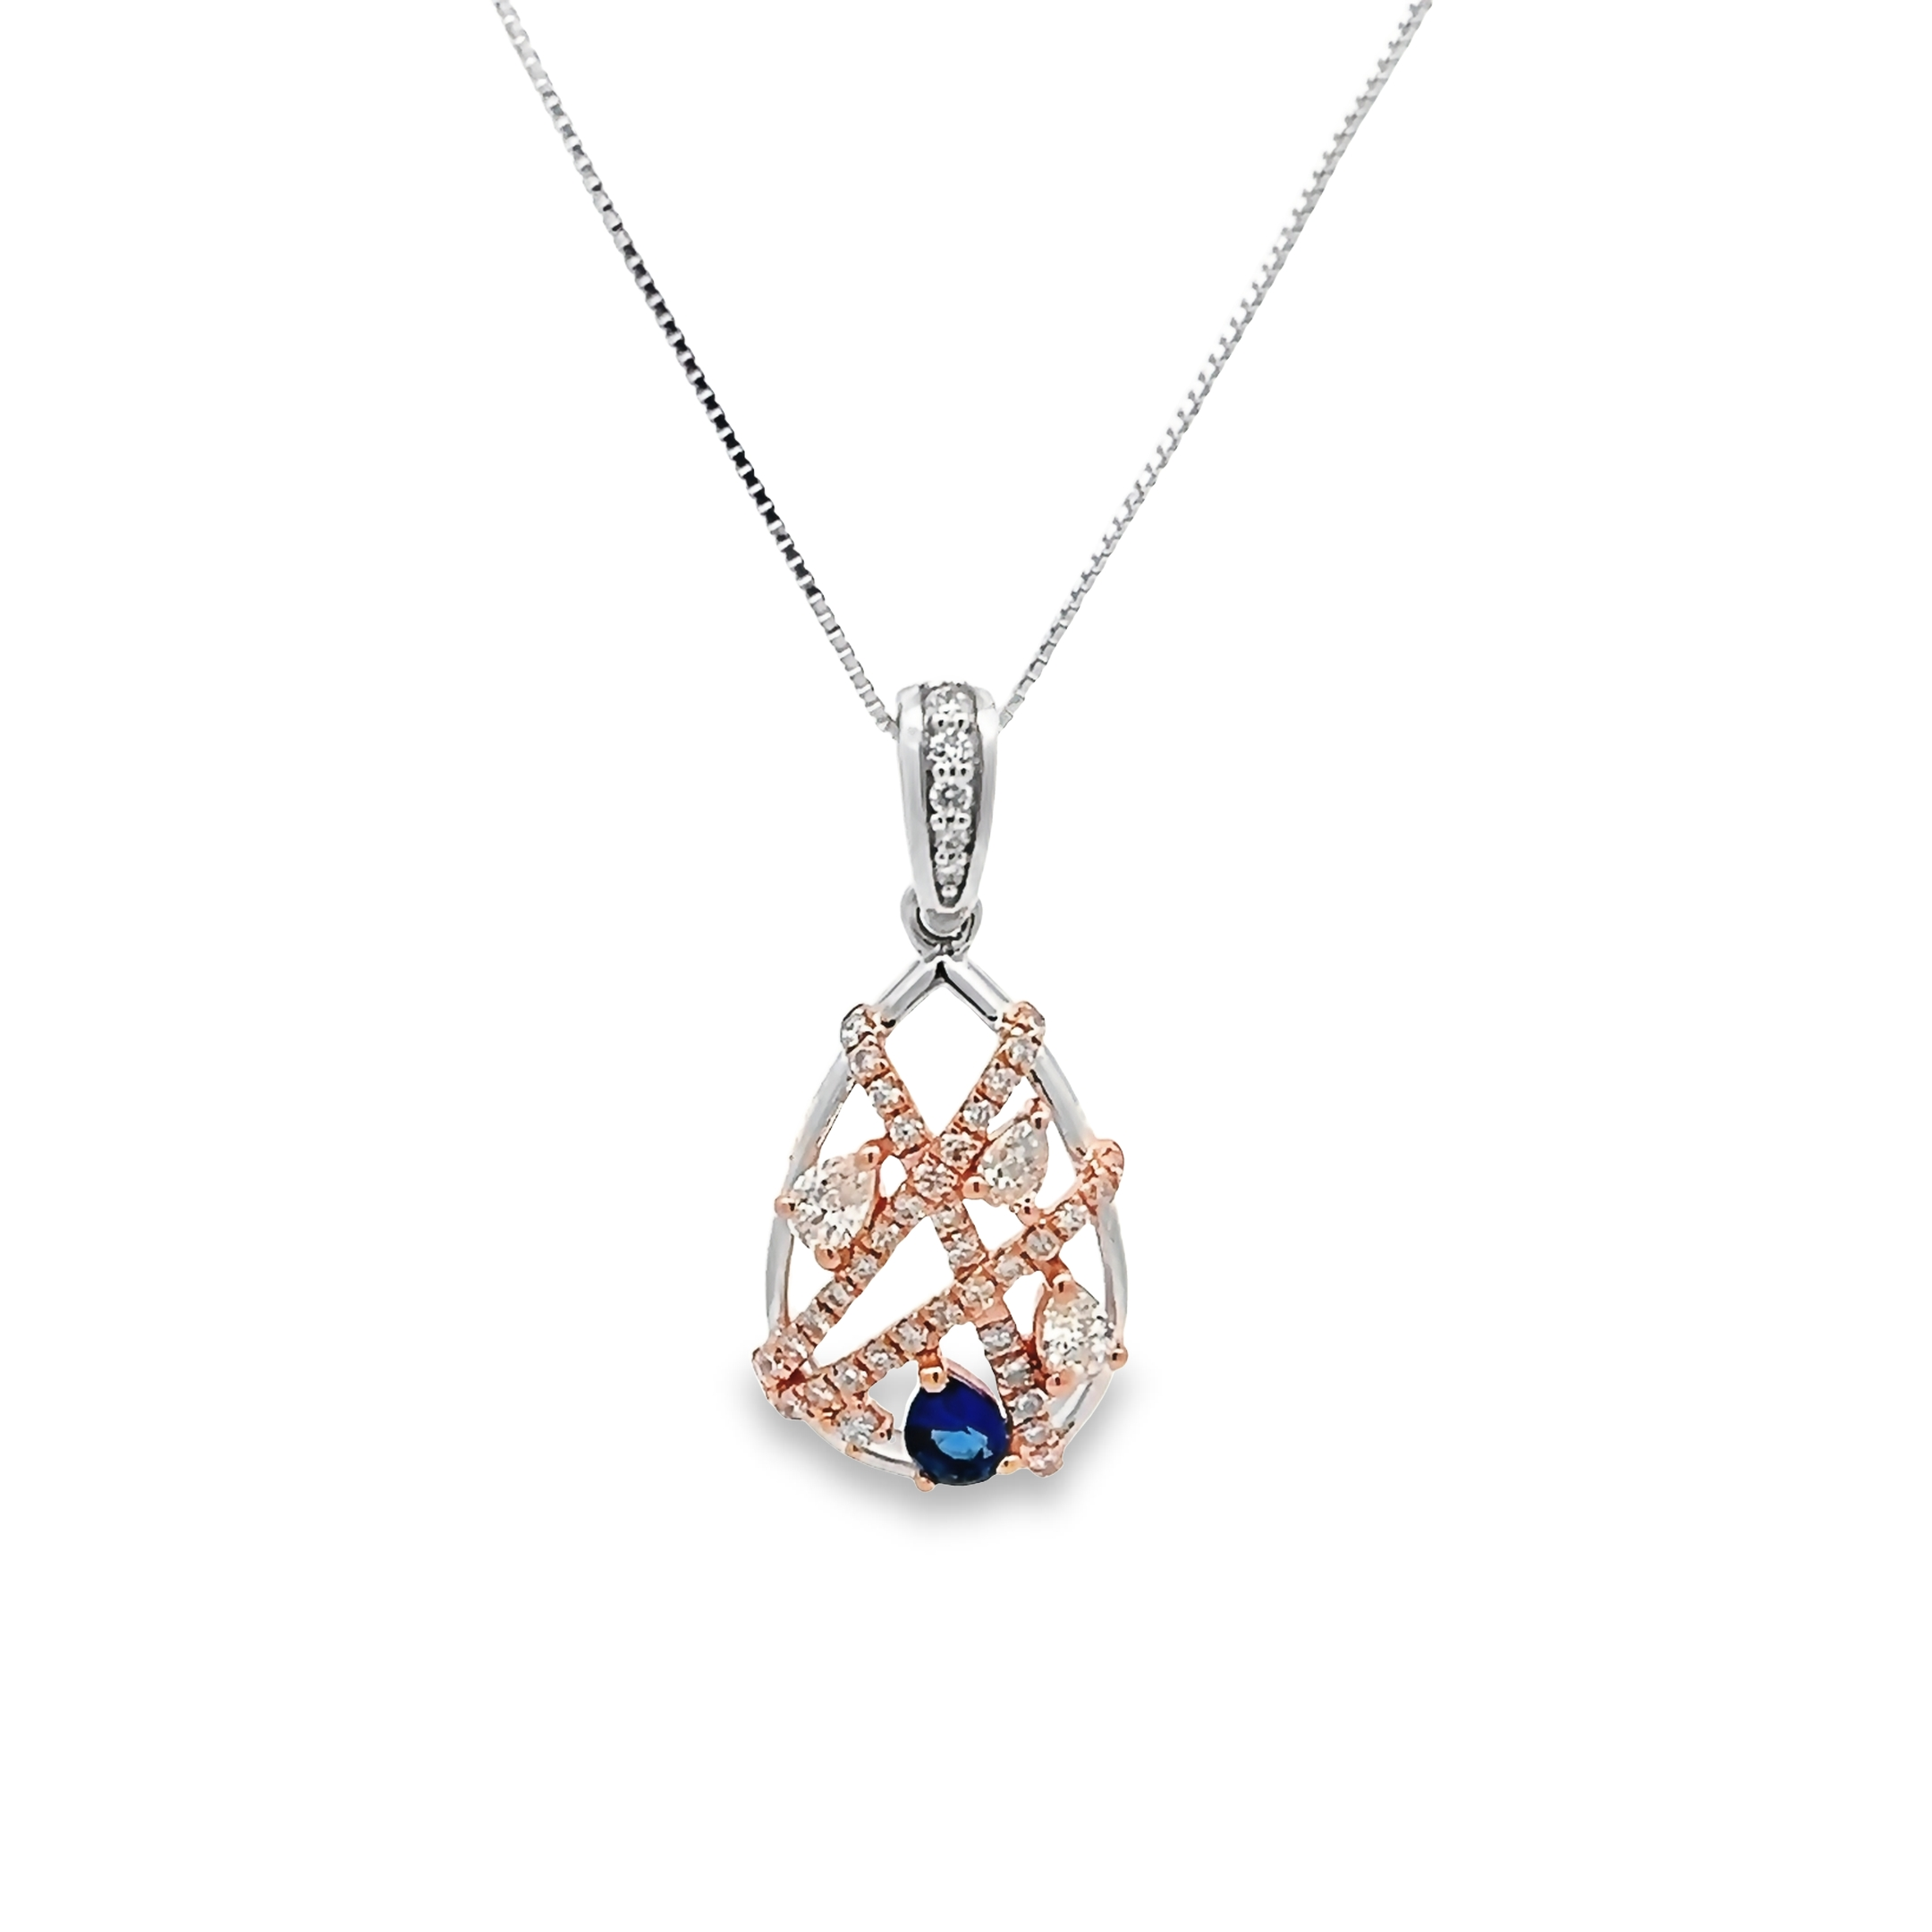 14k Two Toned Free Form Diamond And Sapphire Pendant Necklace